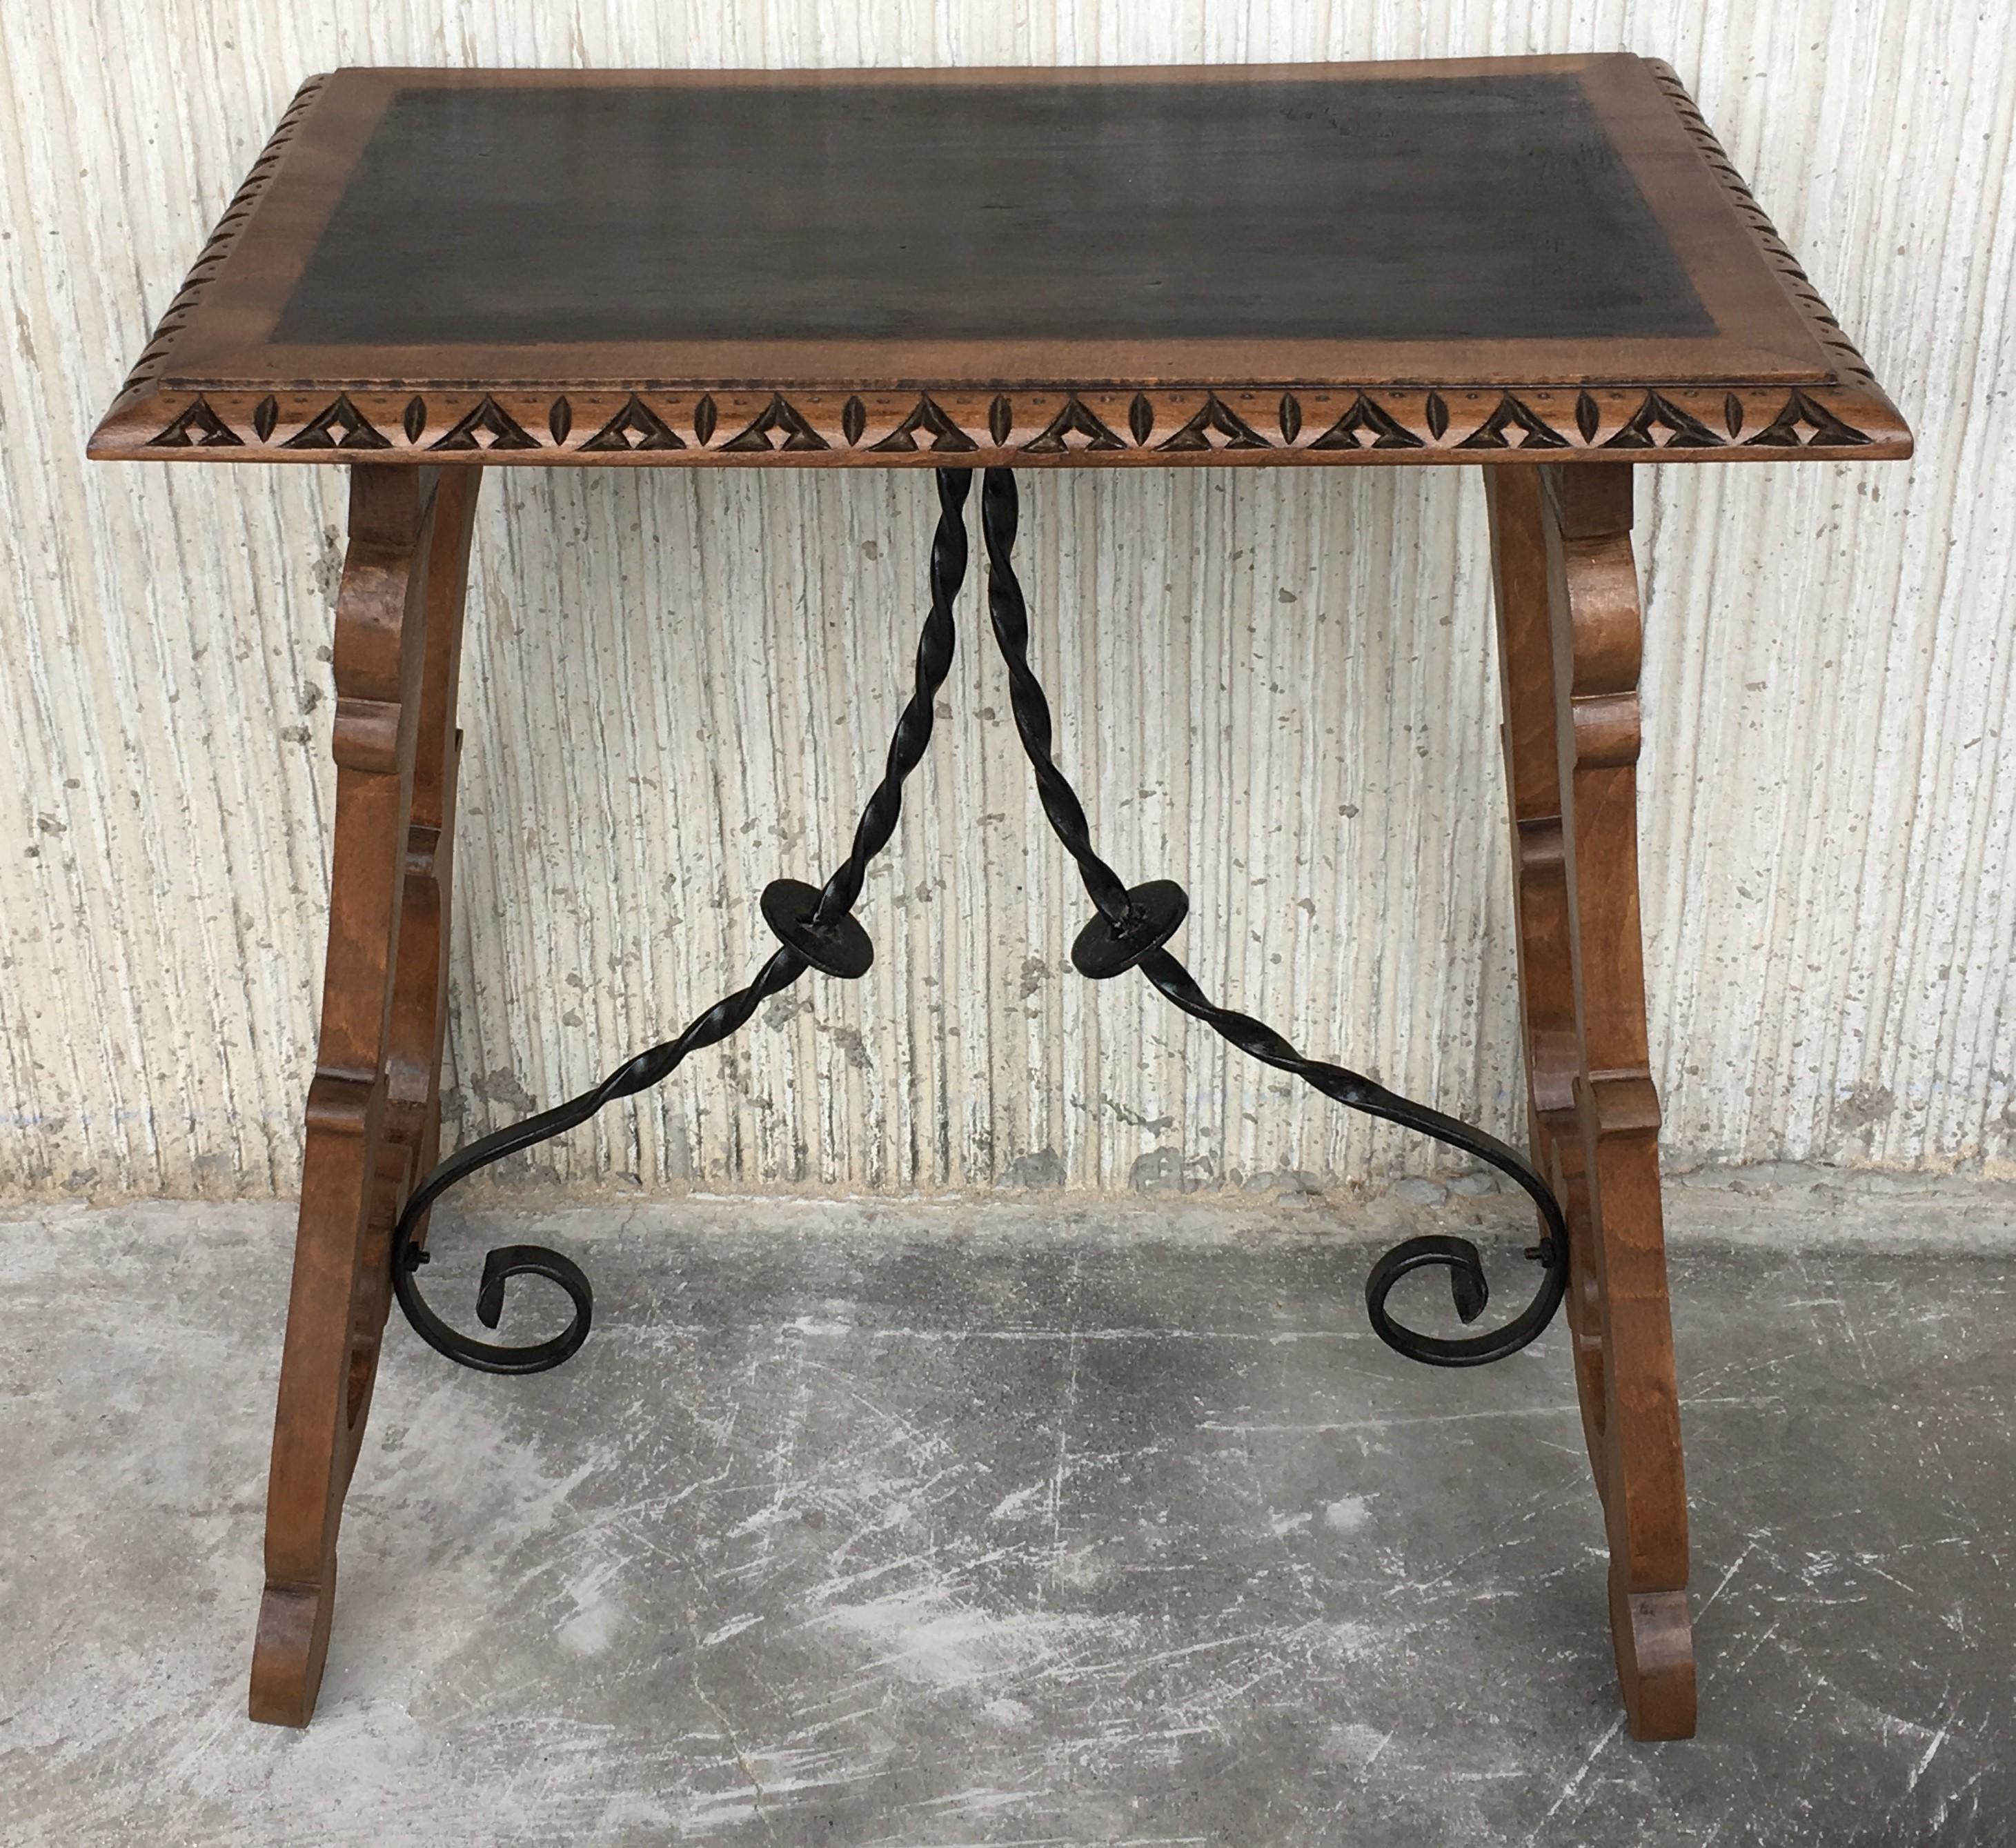 19th century Spanish trestle table in mahogany. This piece has a great scale, lovely carved lyre legs and beautiful ebonized top. This table could be used as an end table, nightstand, side table or small desk.
Restored.